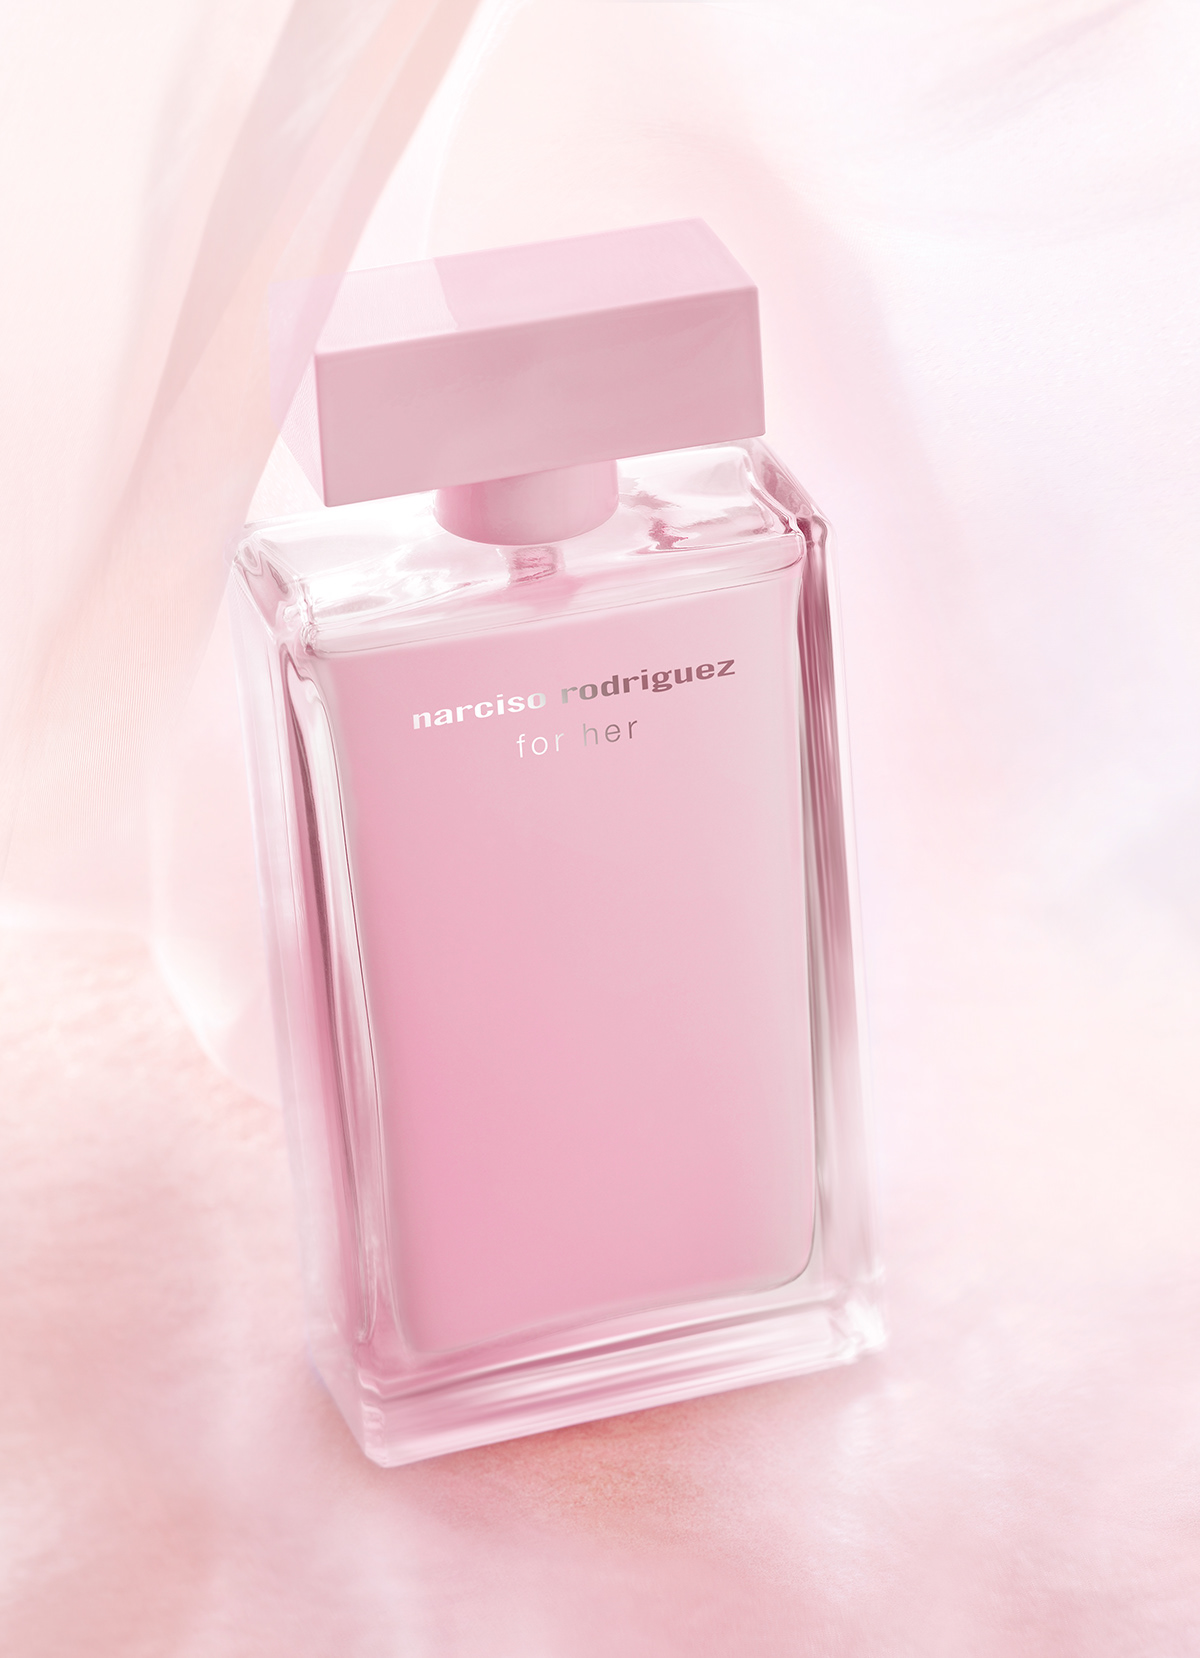 PERFUMES Photography on Behance